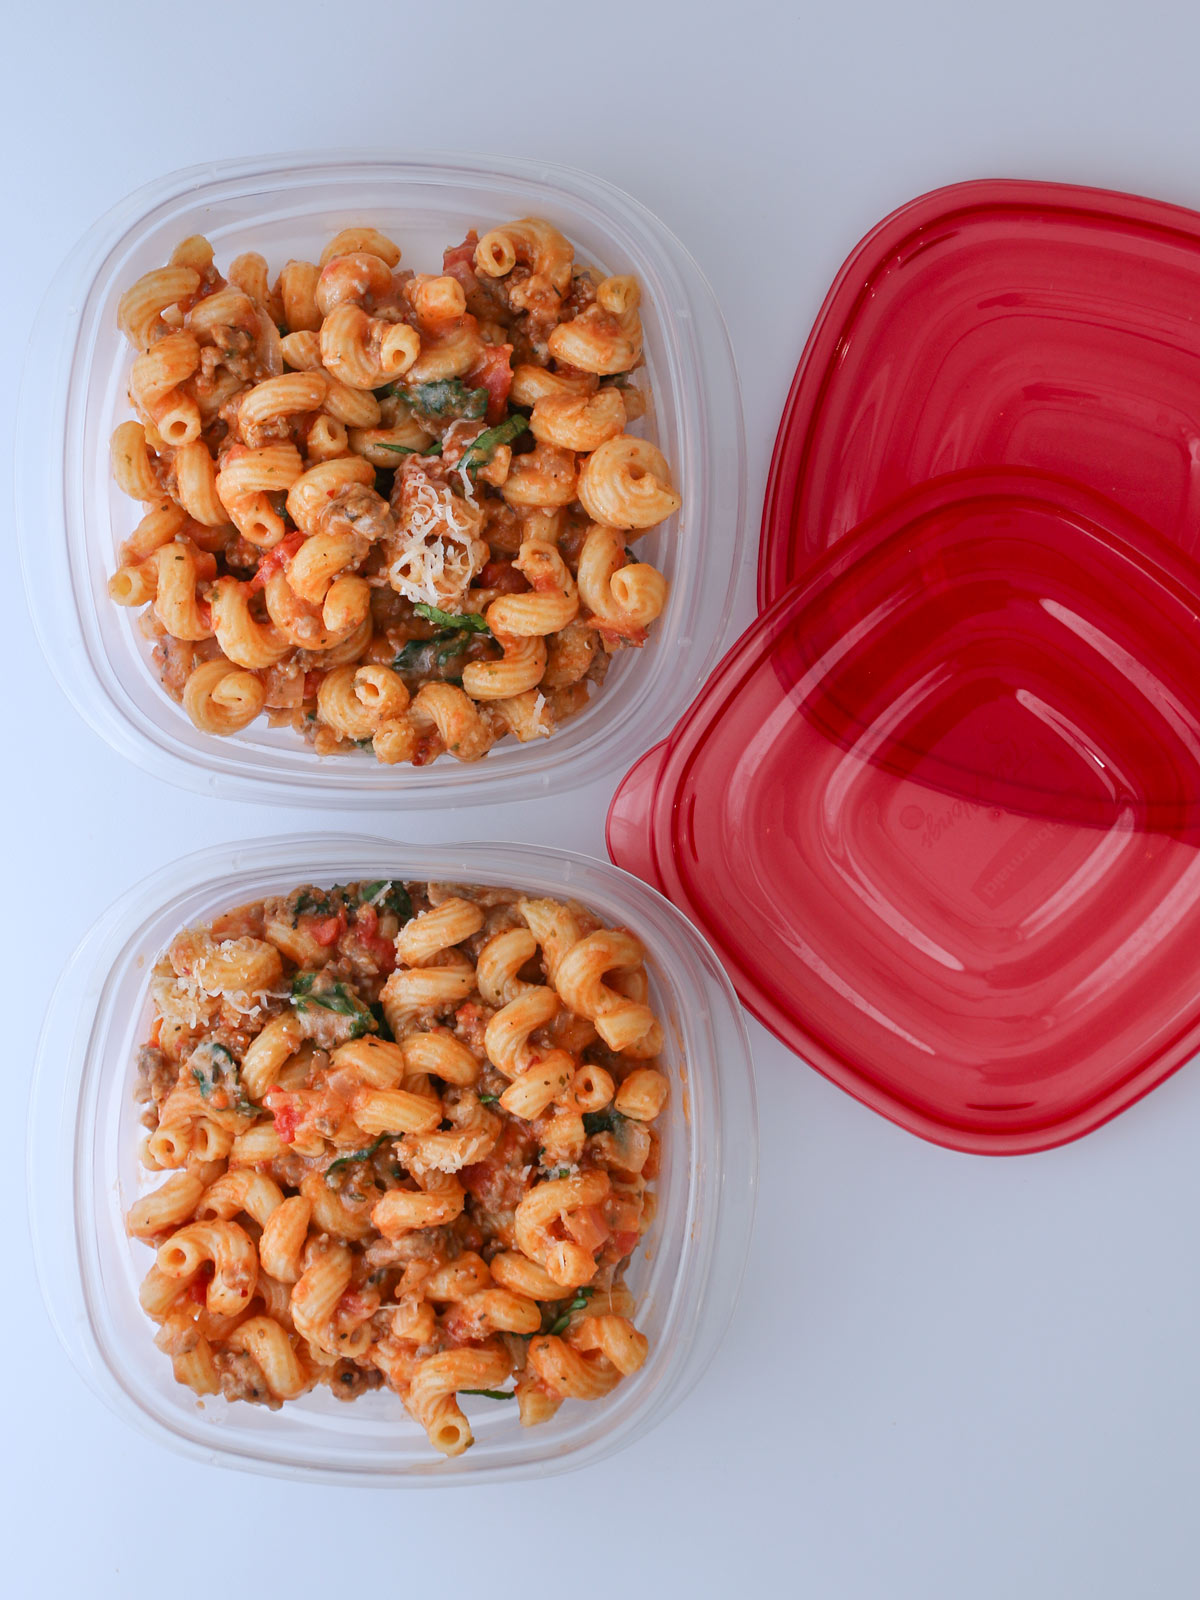 instant pot pasta dished up in meal prep boxes.